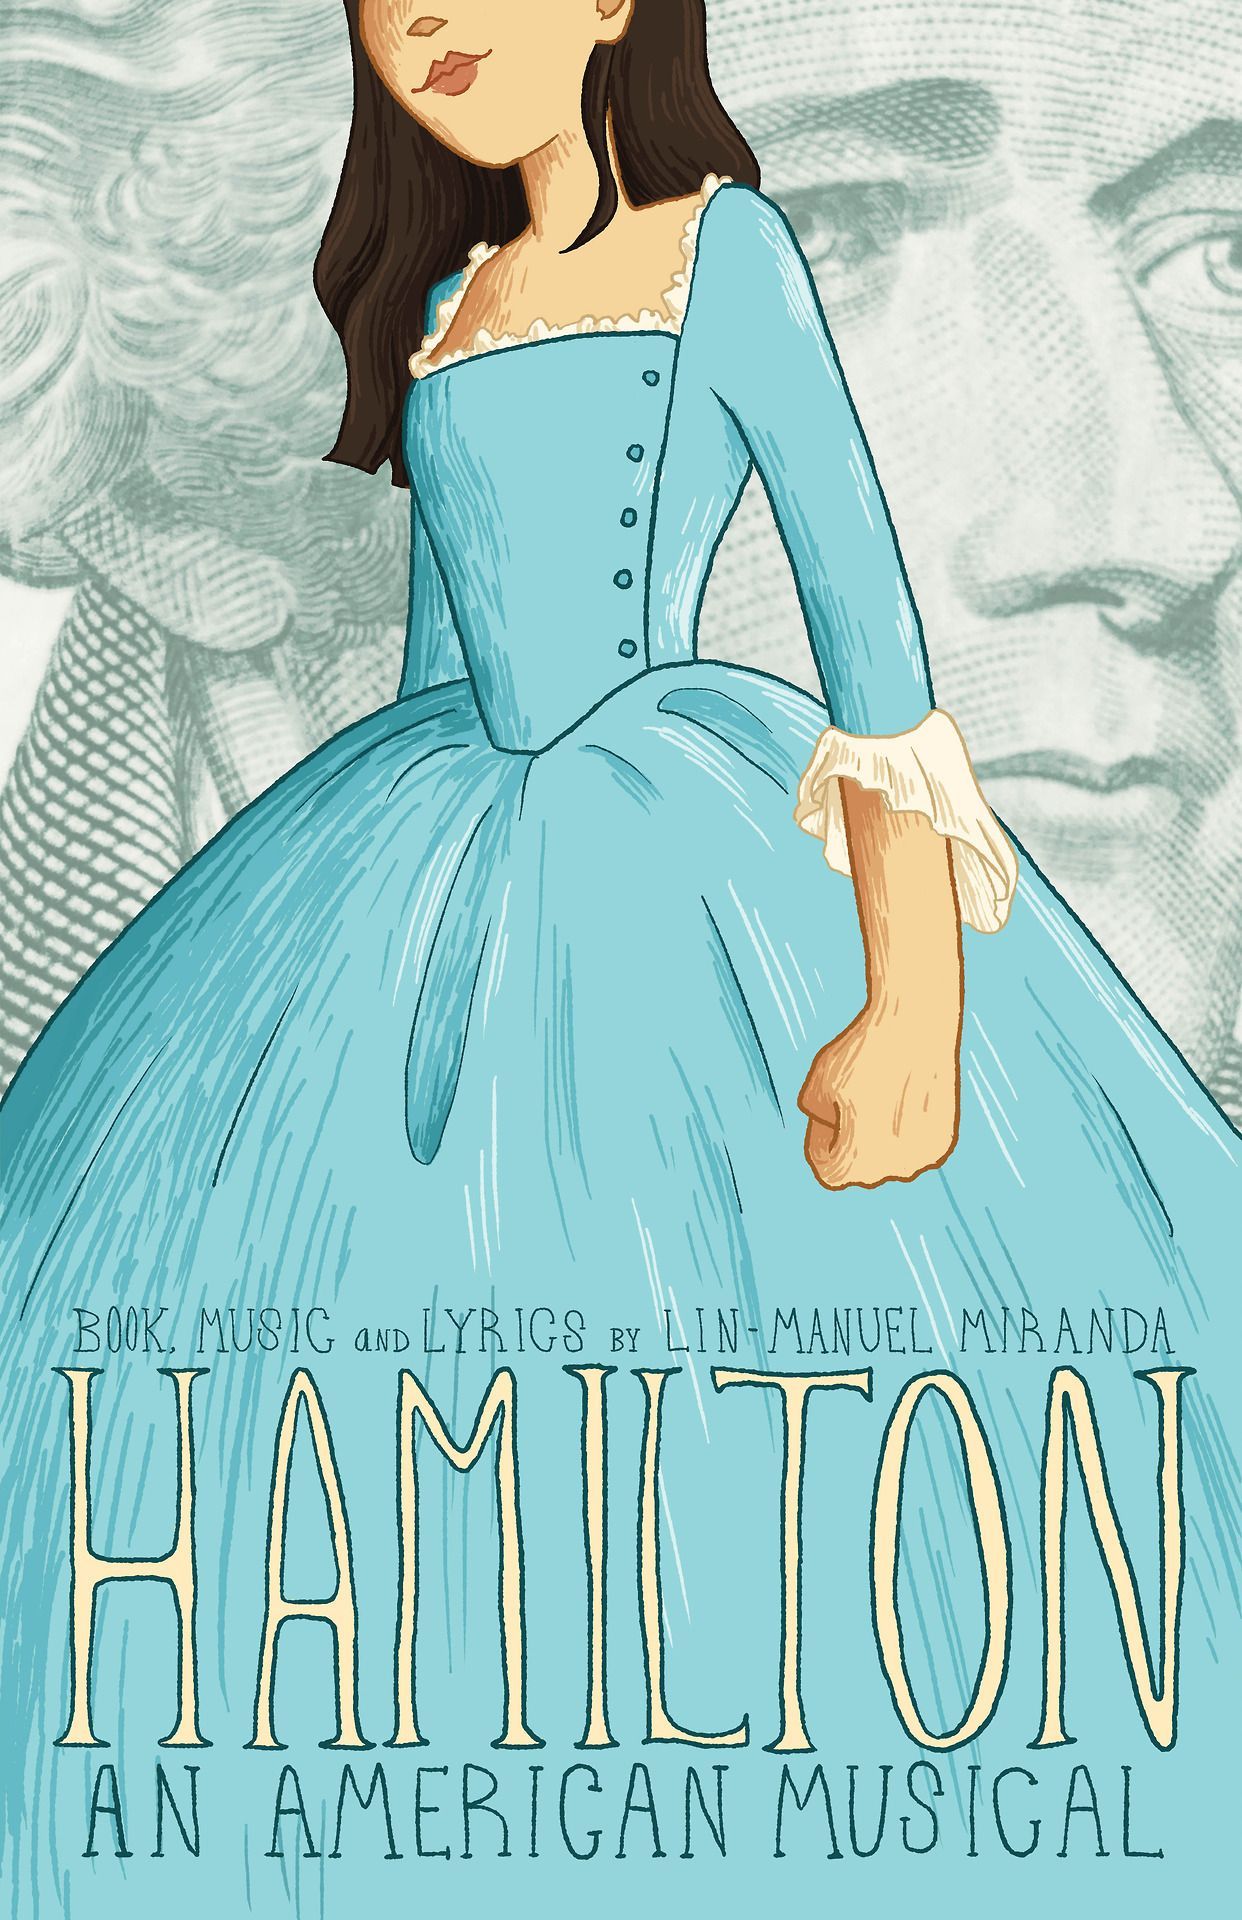 is the hamilton really alexander, or is it also eliza?. Alexander hamilton, Hamilton, Hamilton fanart